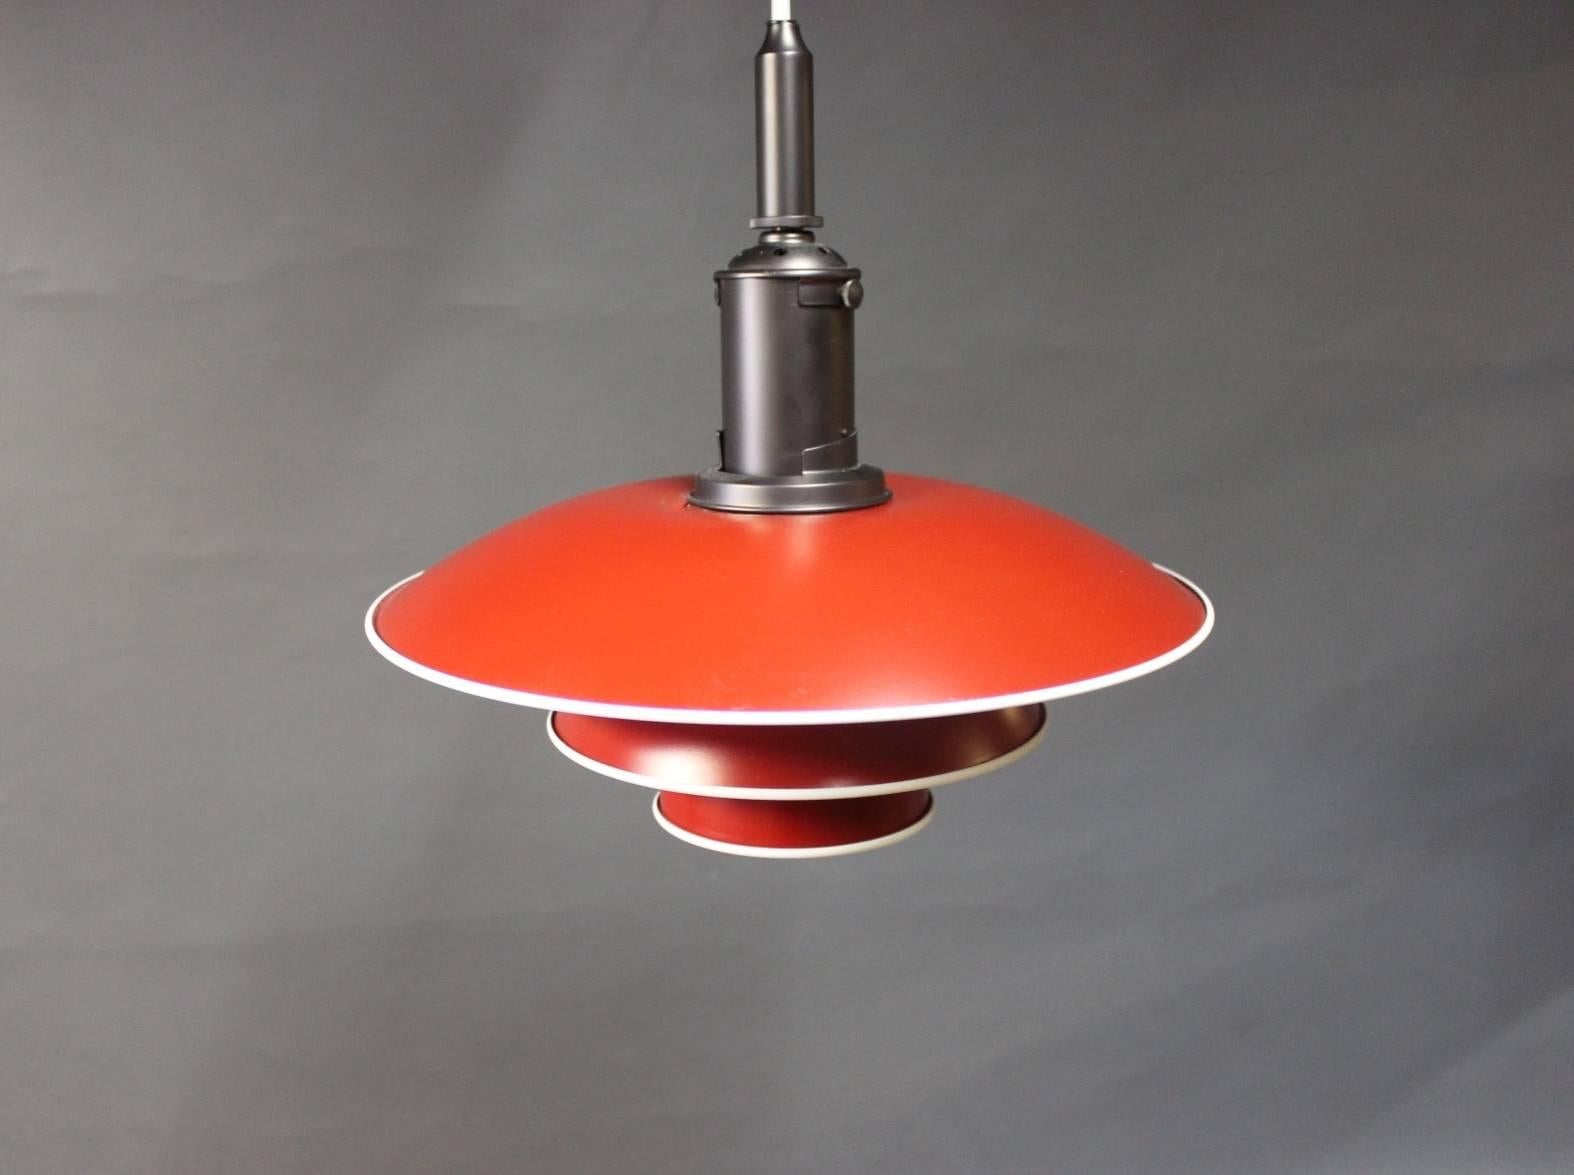 PH3½-3 pendant with red lacquered metal shades with a white edge and mounting in copper. The pendant was launched in occasion of Poul Henningsen's 120th birthday. The pendant is designed from Poul Henningsen's designs from the early 1920s-late 1930s